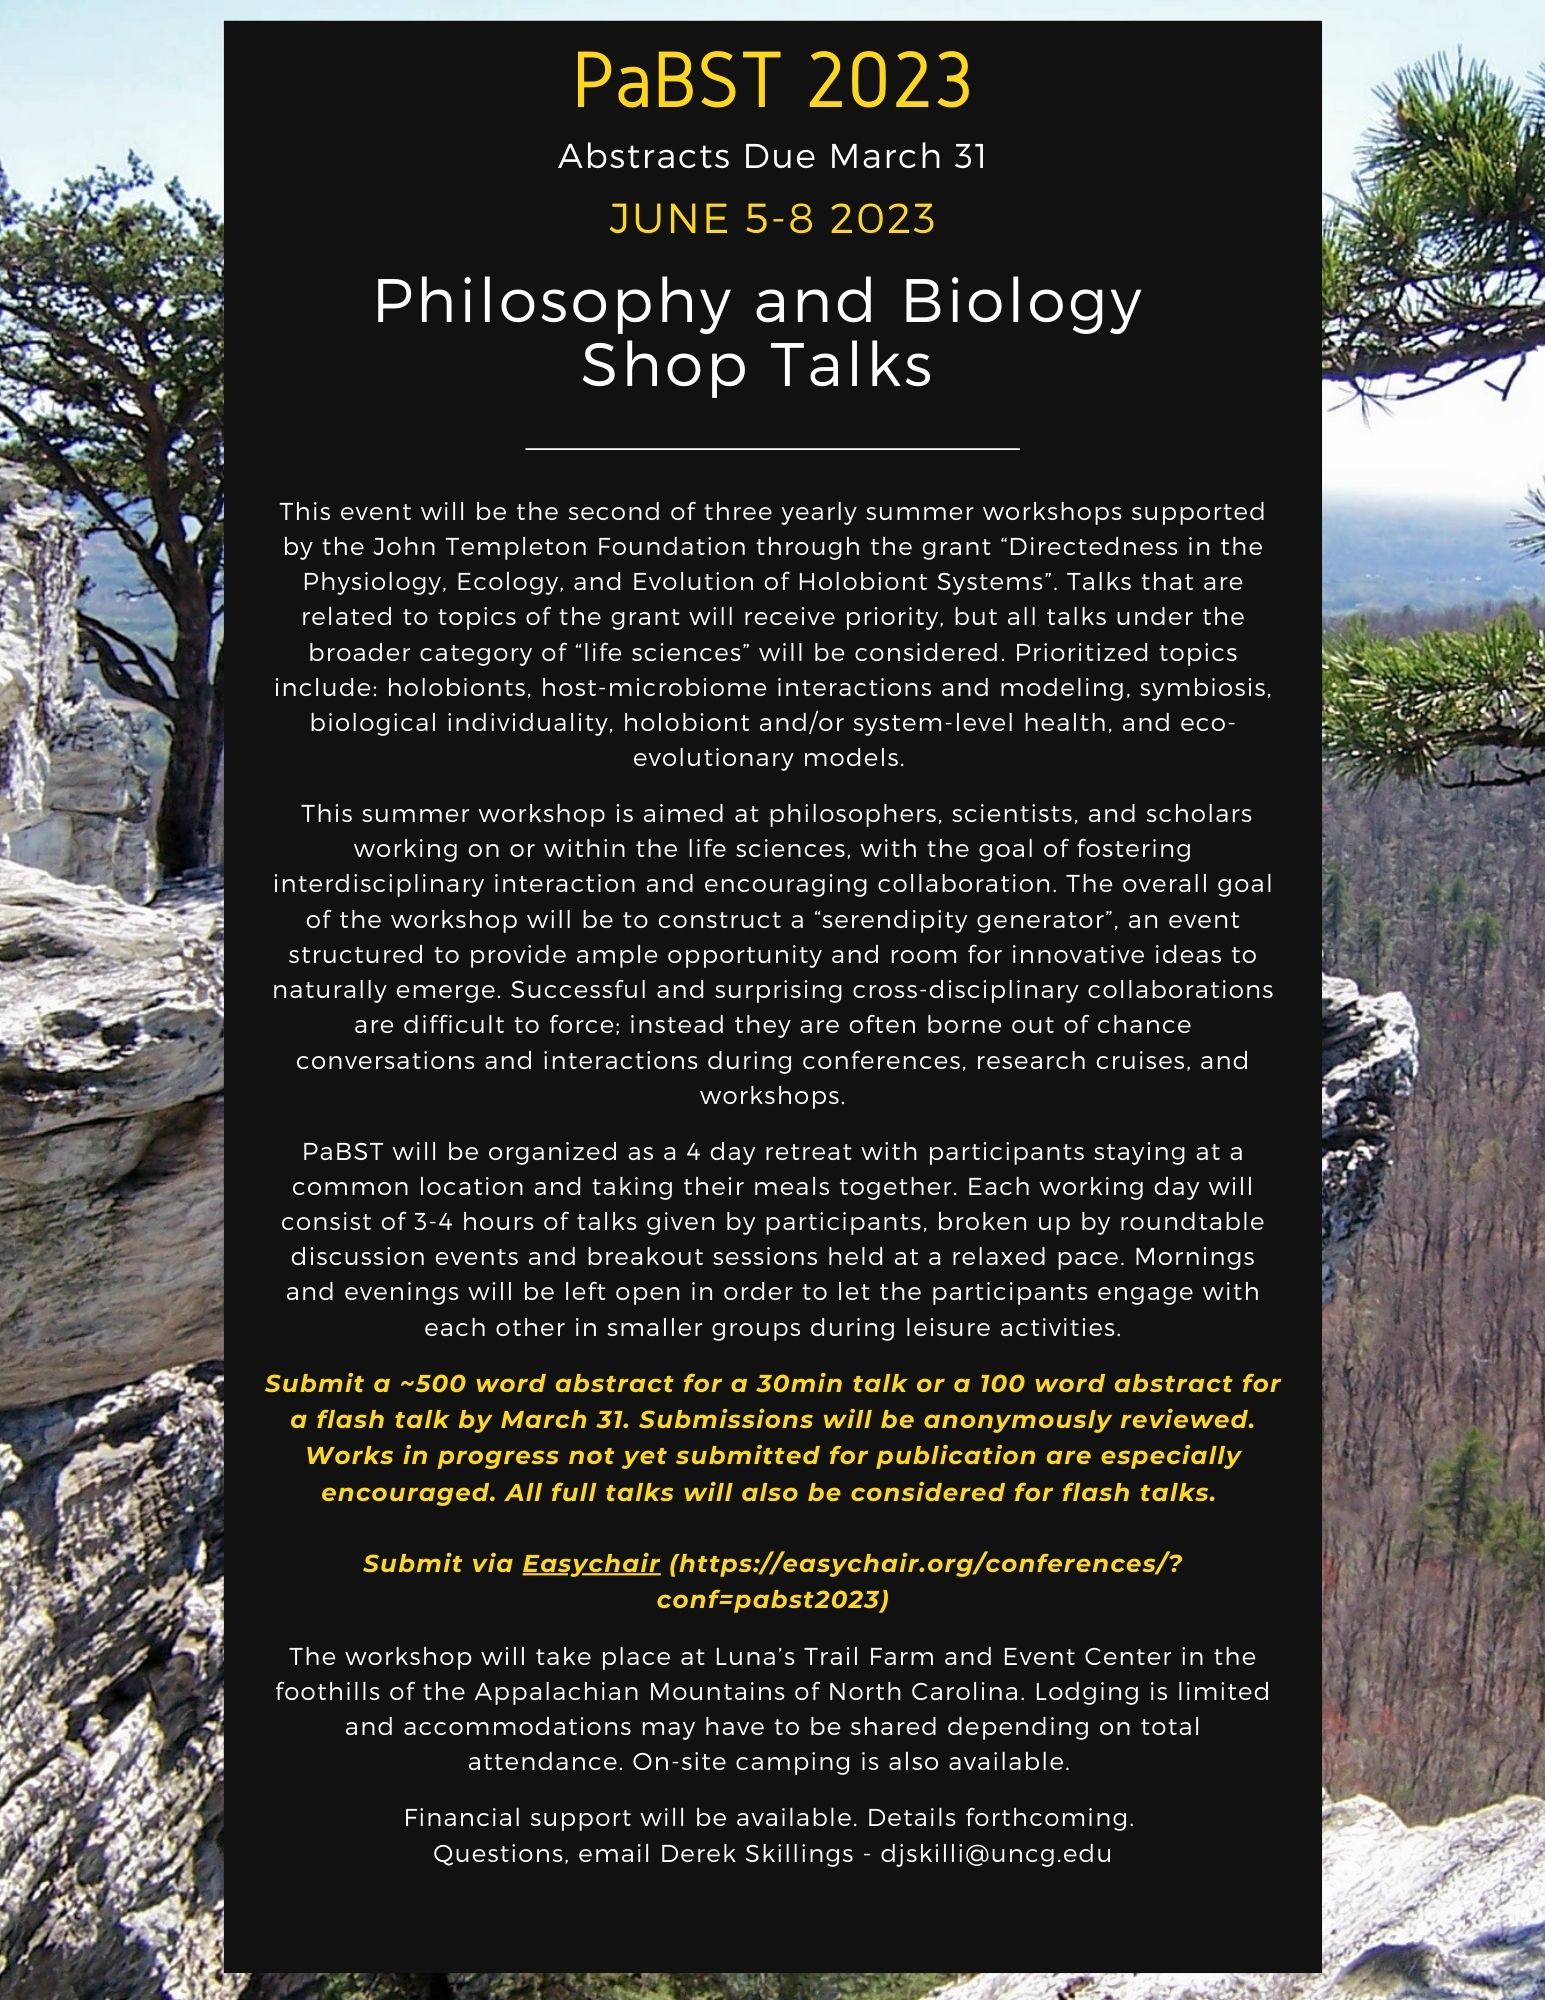 information about the philosophy and biology shop talk event in June 2023